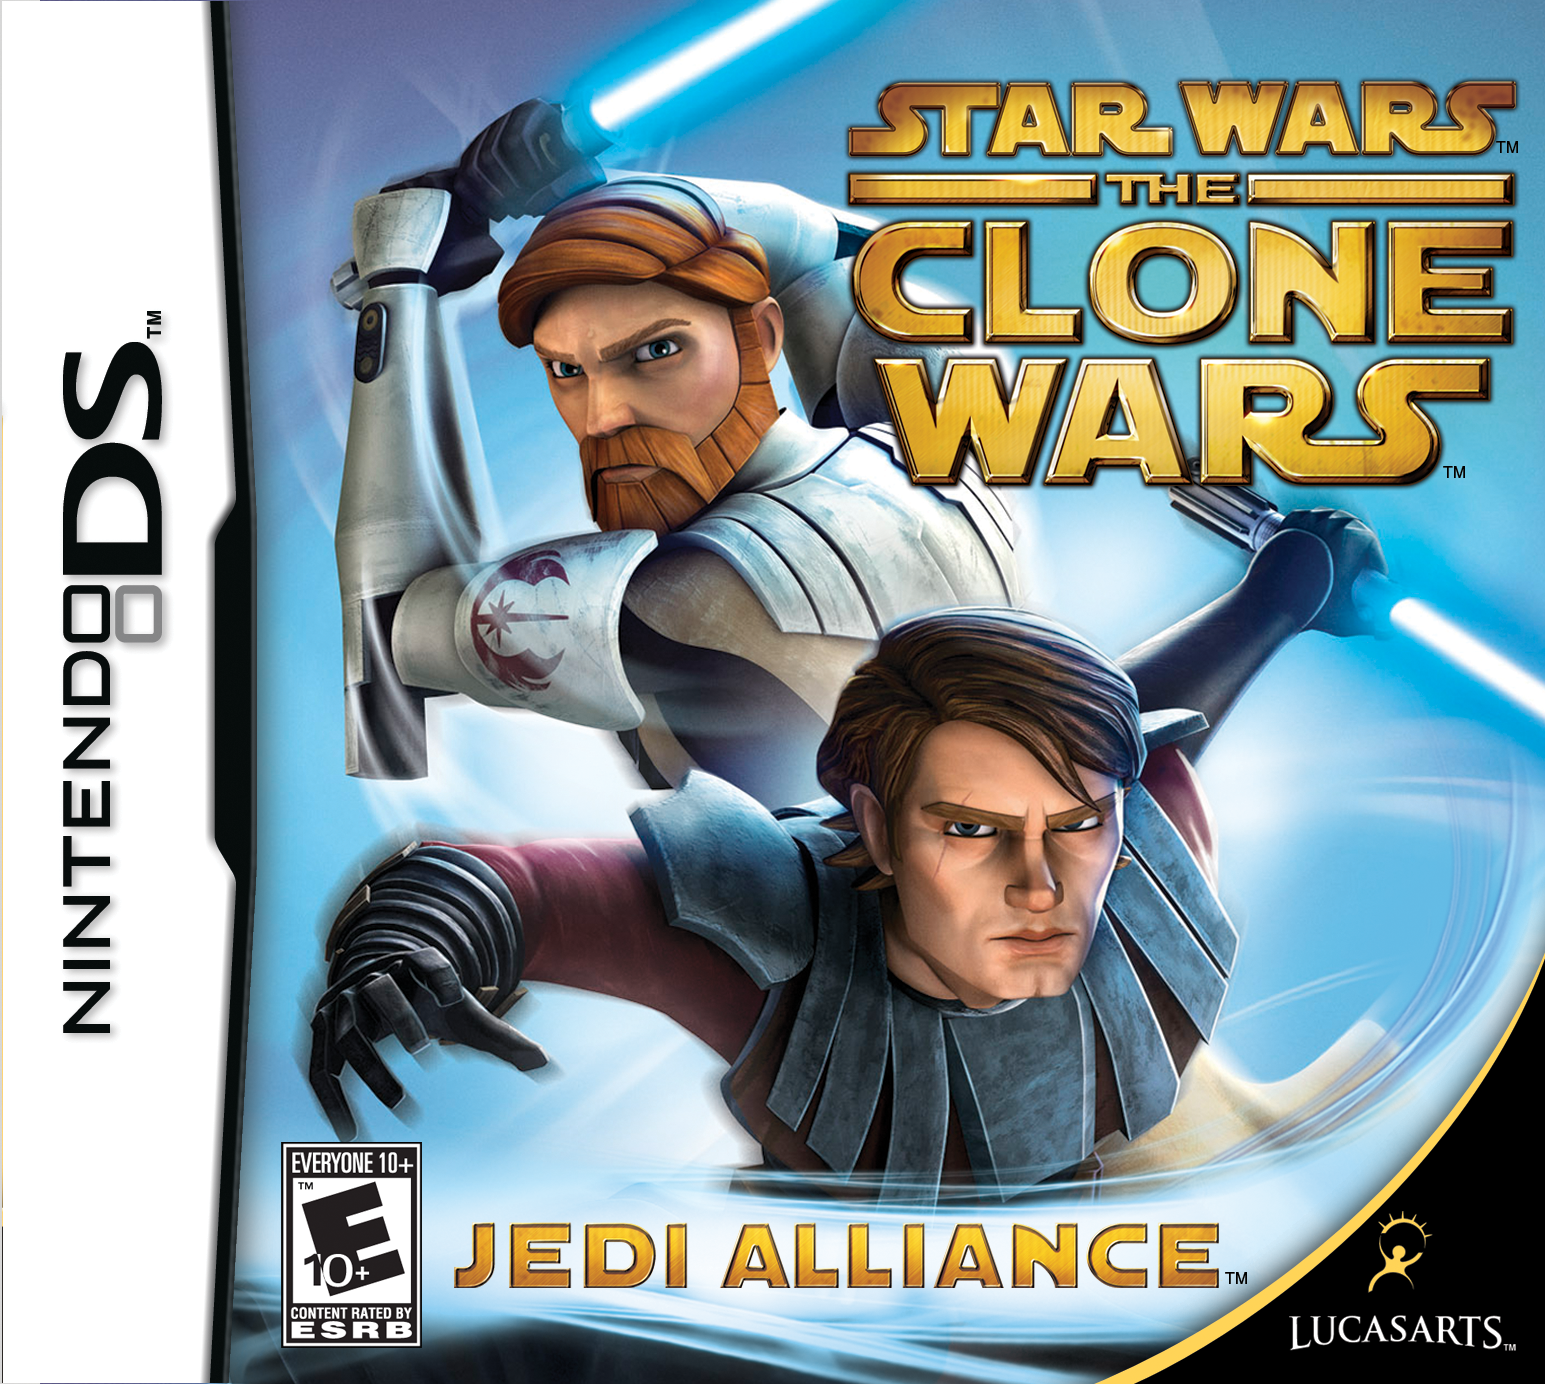 Star Wars: The Clone Wars Pics, Movie Collection